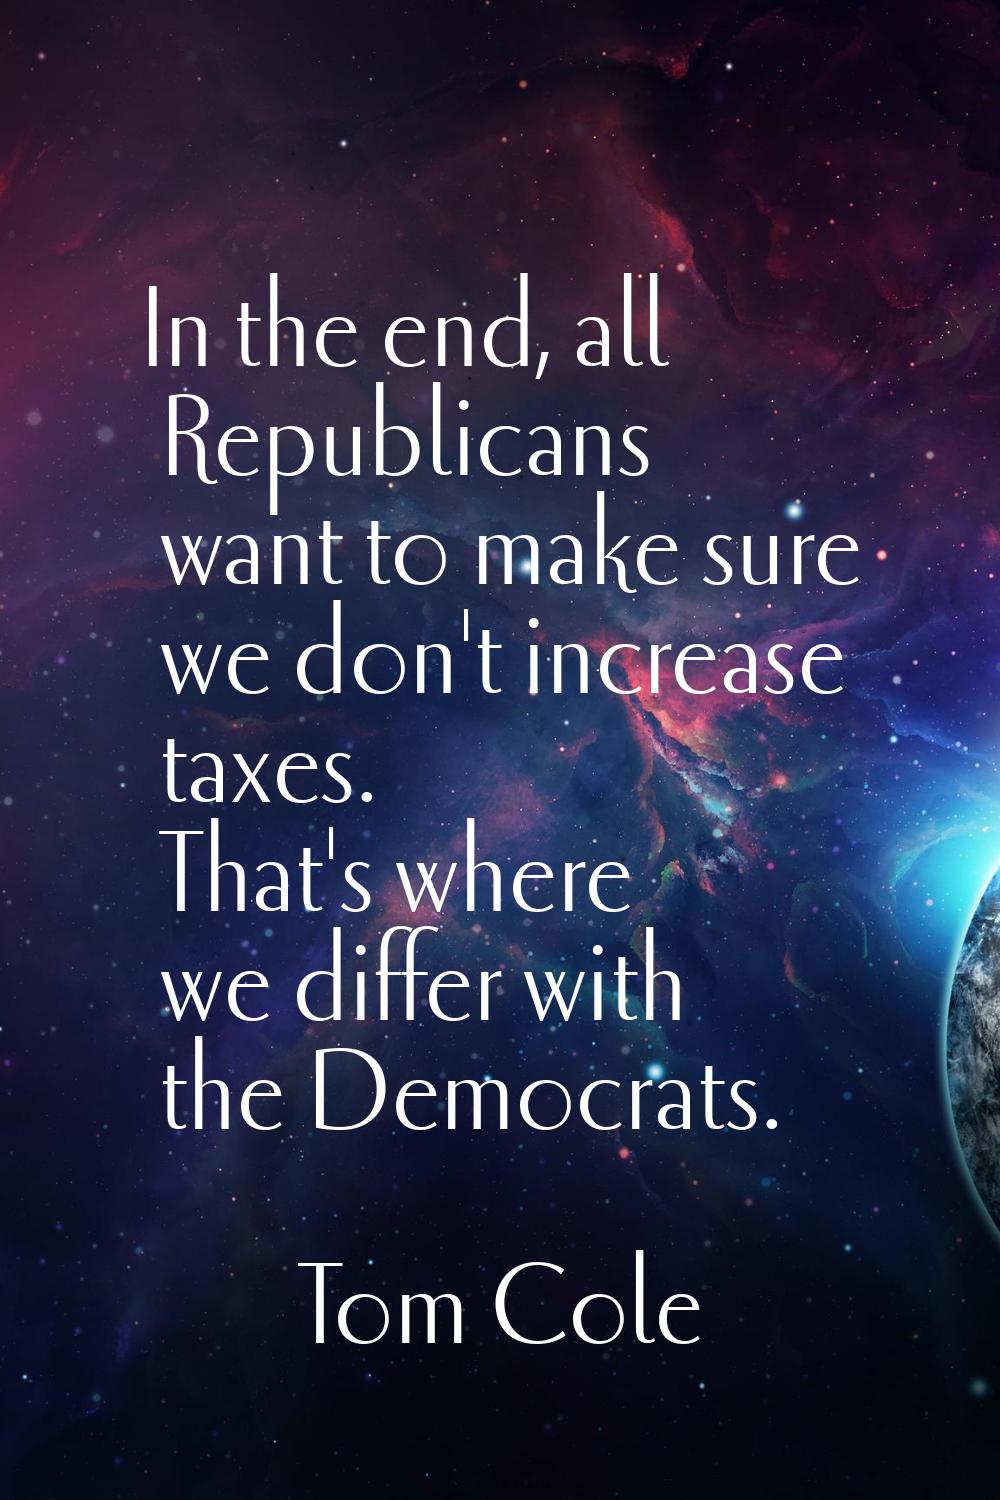 In the end, all Republicans want to make sure we don't increase taxes. That's where we differ with 